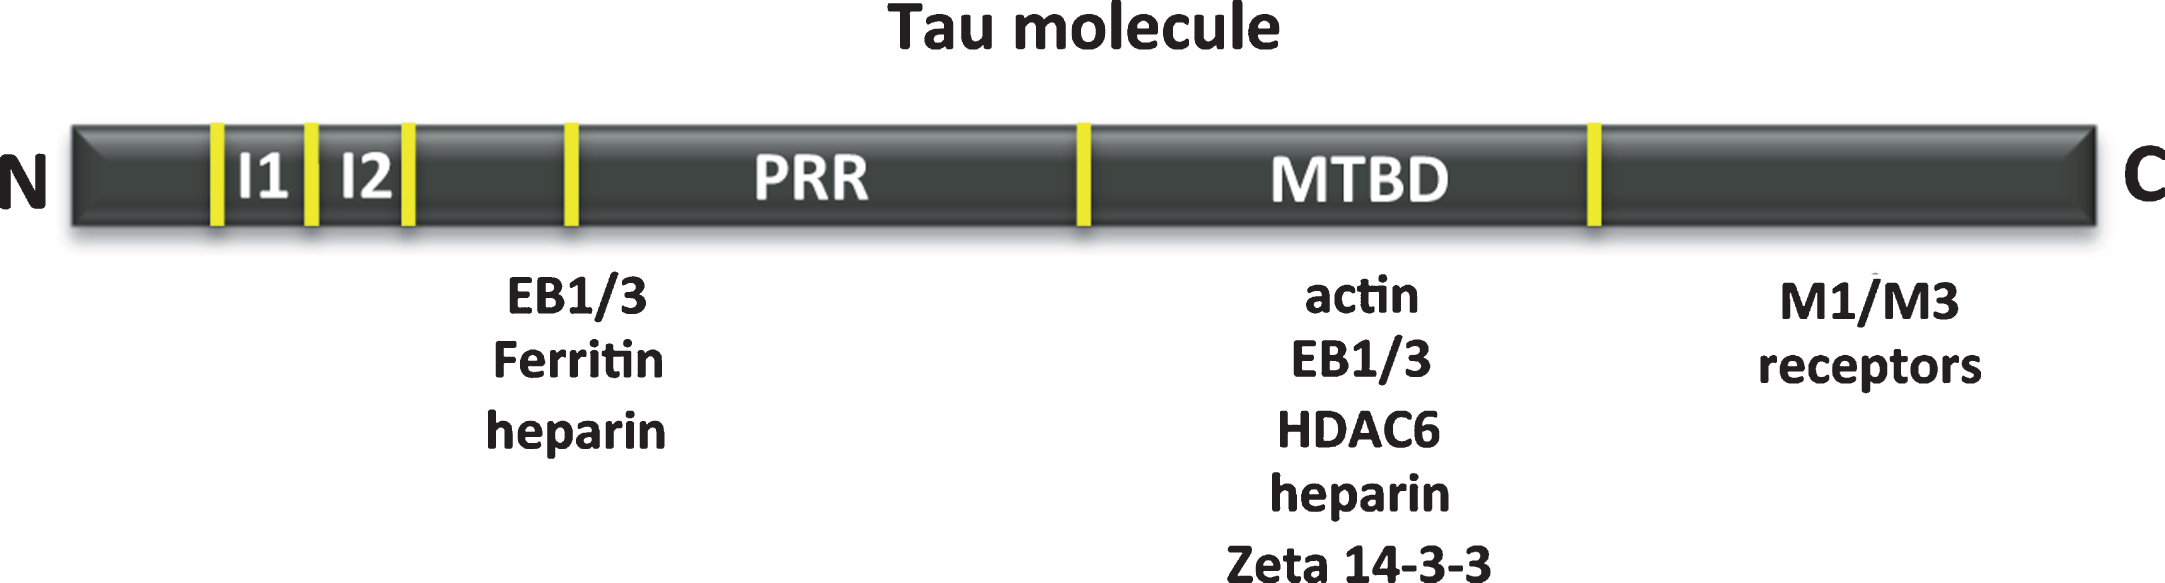 Other tau-associated proteins. Map of the interaction of tau regions with various molecules, such as actin, heparin, muscarinic receptor, zeta 14-3-3 protein, EB1/3 proteins, deacetylase HDAC6 and ferritin.